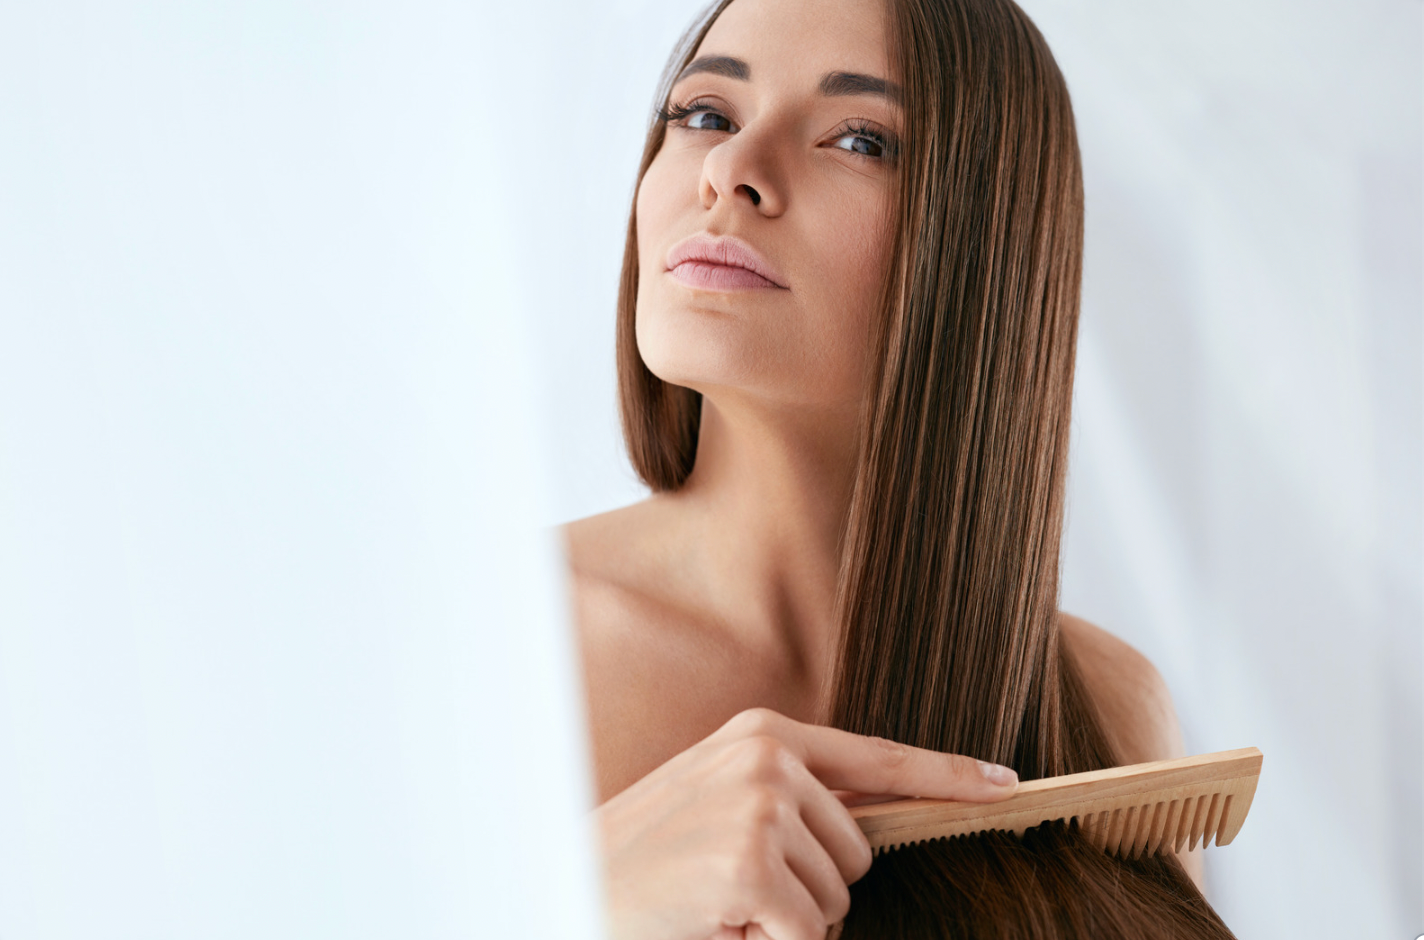 Why Beauty Experts Recommend Hair Combing As Part of Your Morning Routine